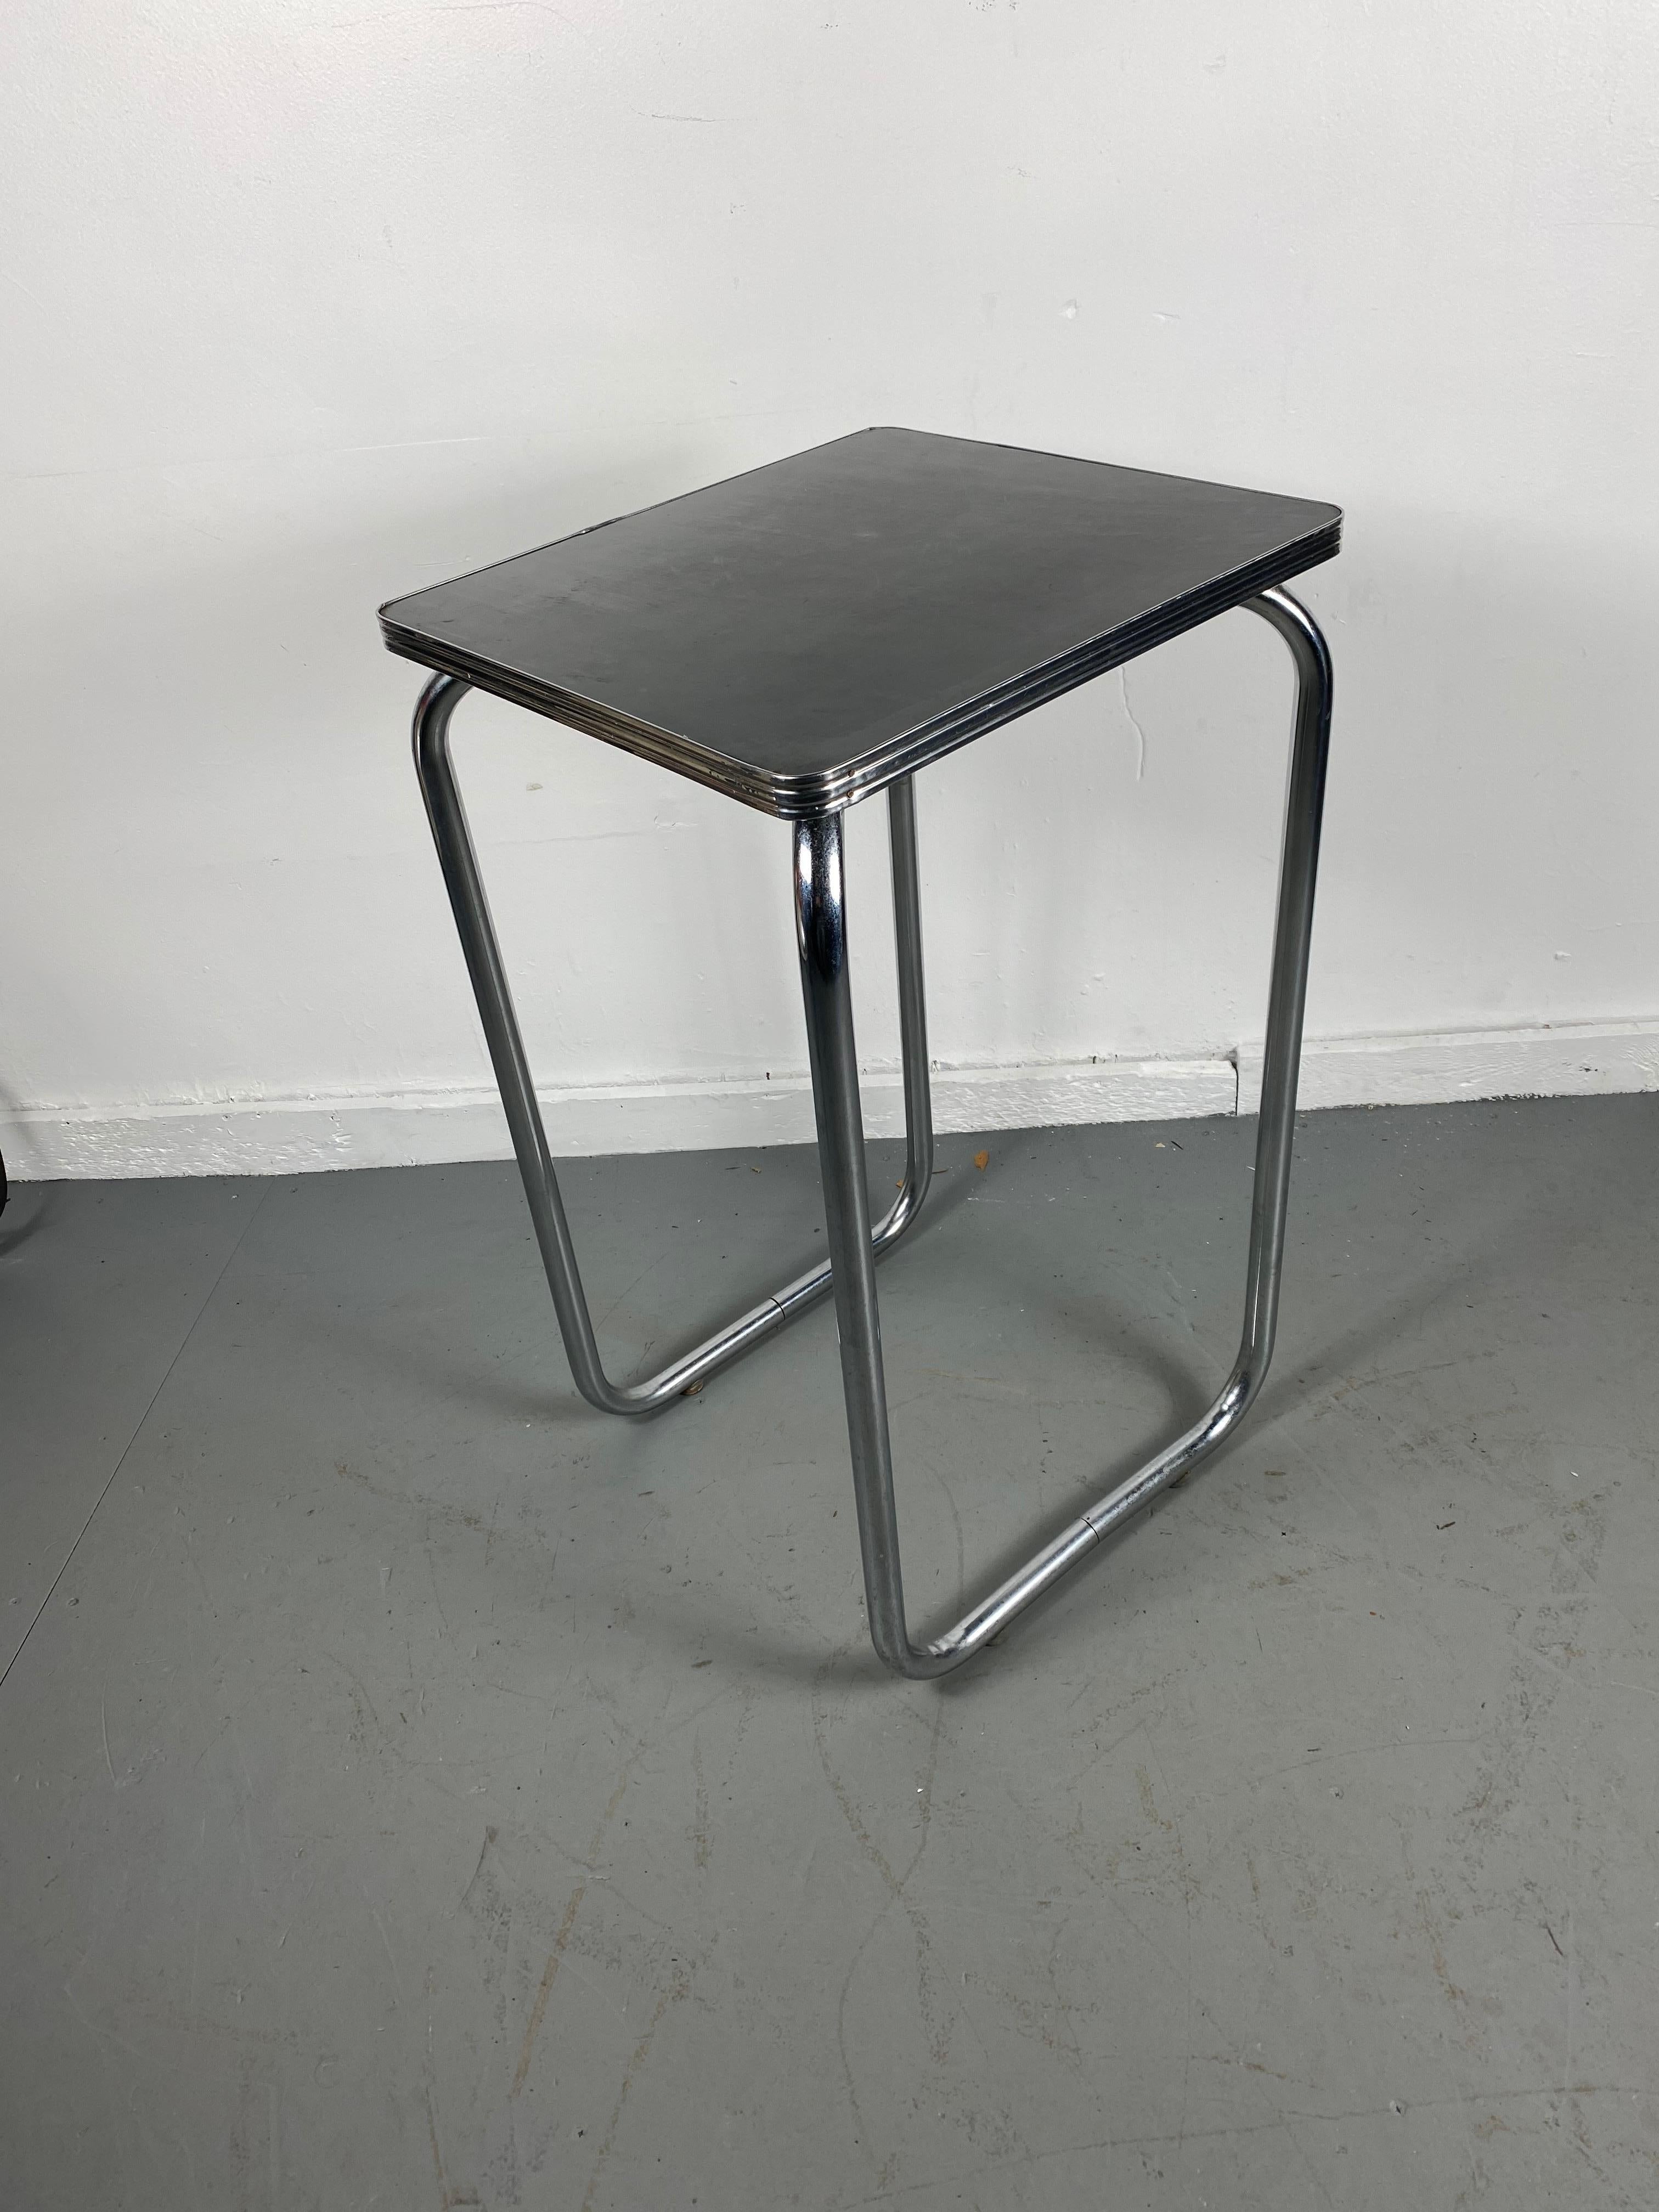 Mid-20th Century Unusual Bauhaus Style Black and Tubular Chrome Table / Stand / Wolfgang Hoffmann For Sale